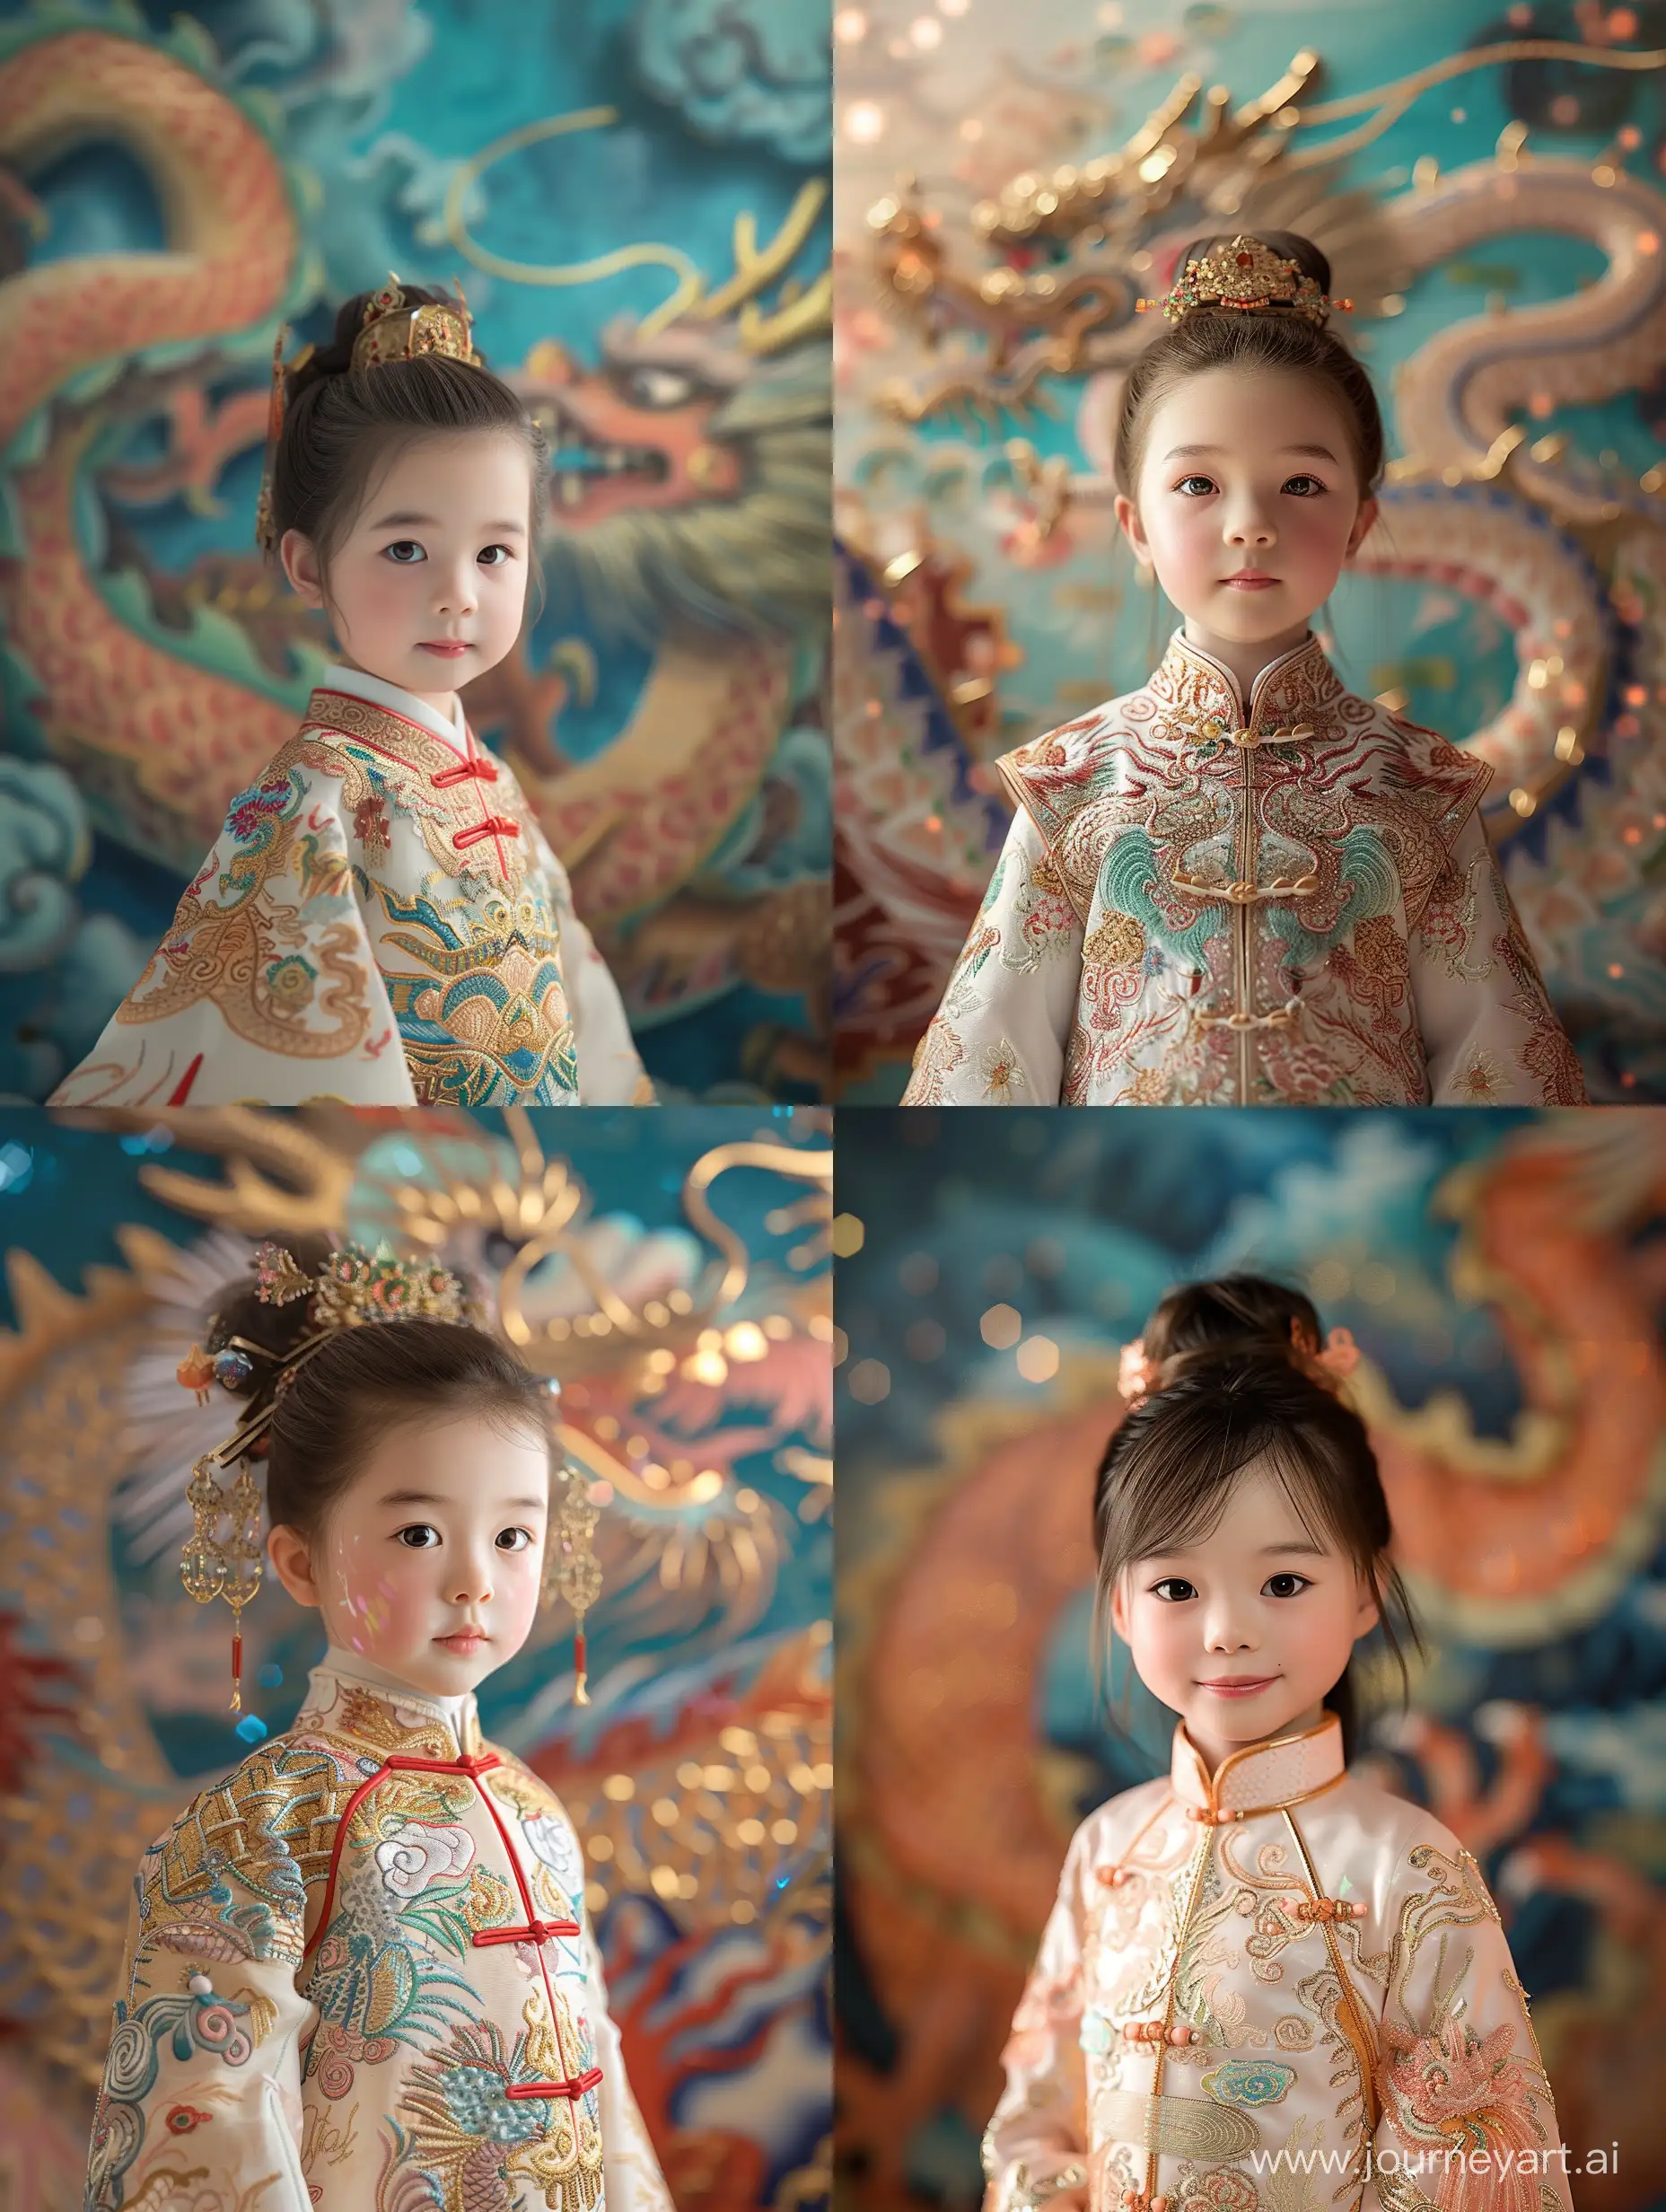 Charming-5YearOld-Chinese-Girl-in-Traditional-Costume-Poses-Before-Dragon-Mural